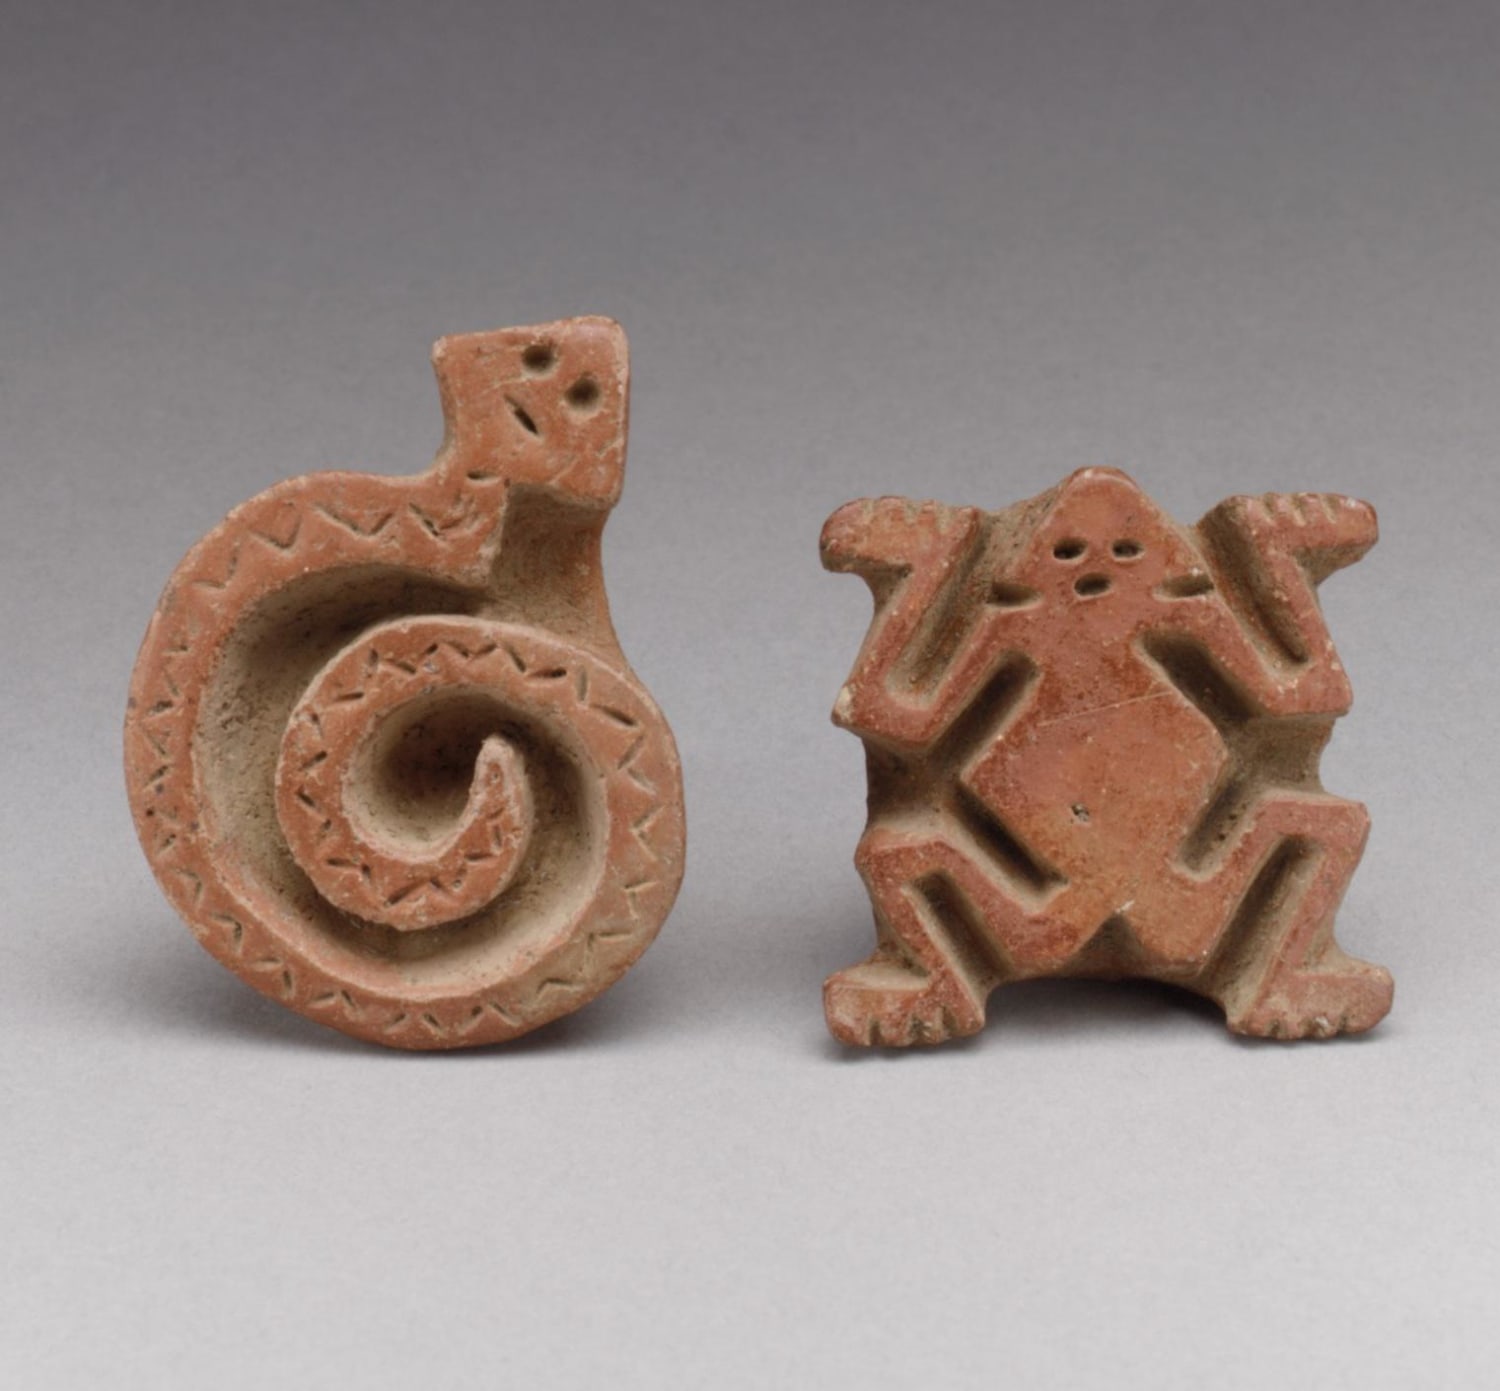 Two ceramic flat stamps from Costa Rica. 1st–7th century CE, now housed at the Metropolitan Museum